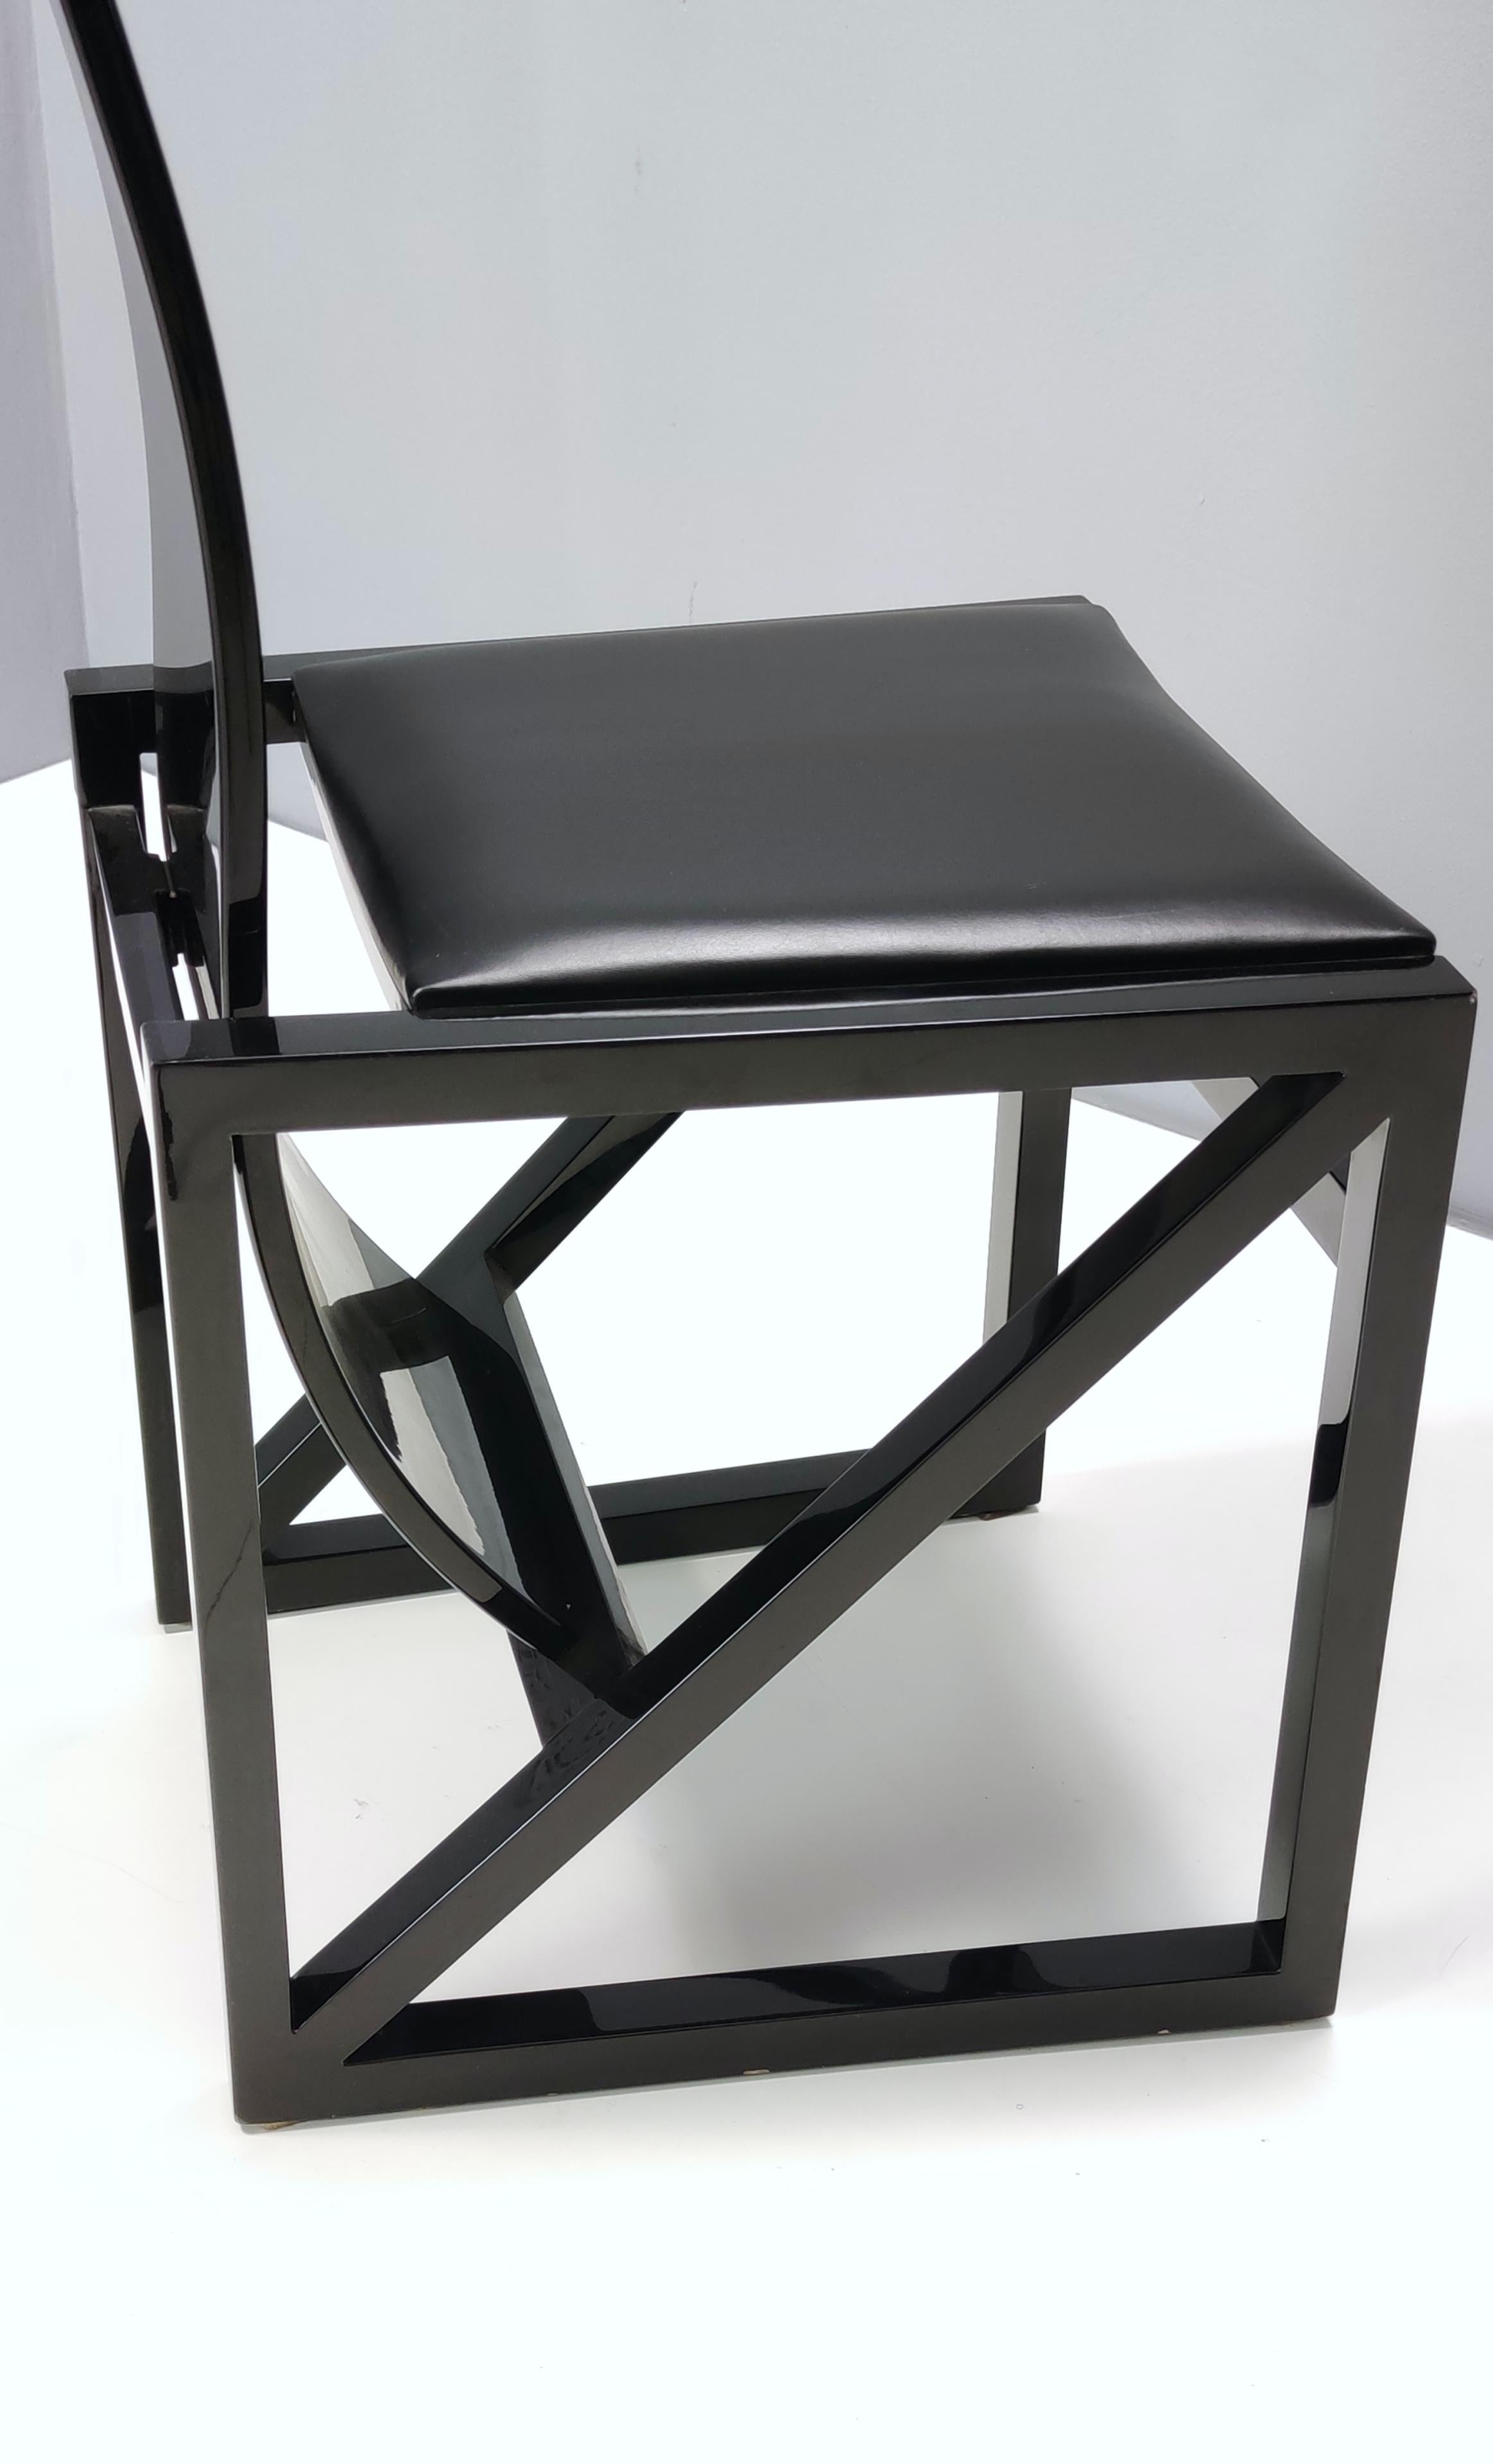 Postmodern Japanese EDO Chair by Kisho Kurokawa for PPM Corporation, 1980s In Excellent Condition For Sale In Bresso, Lombardy